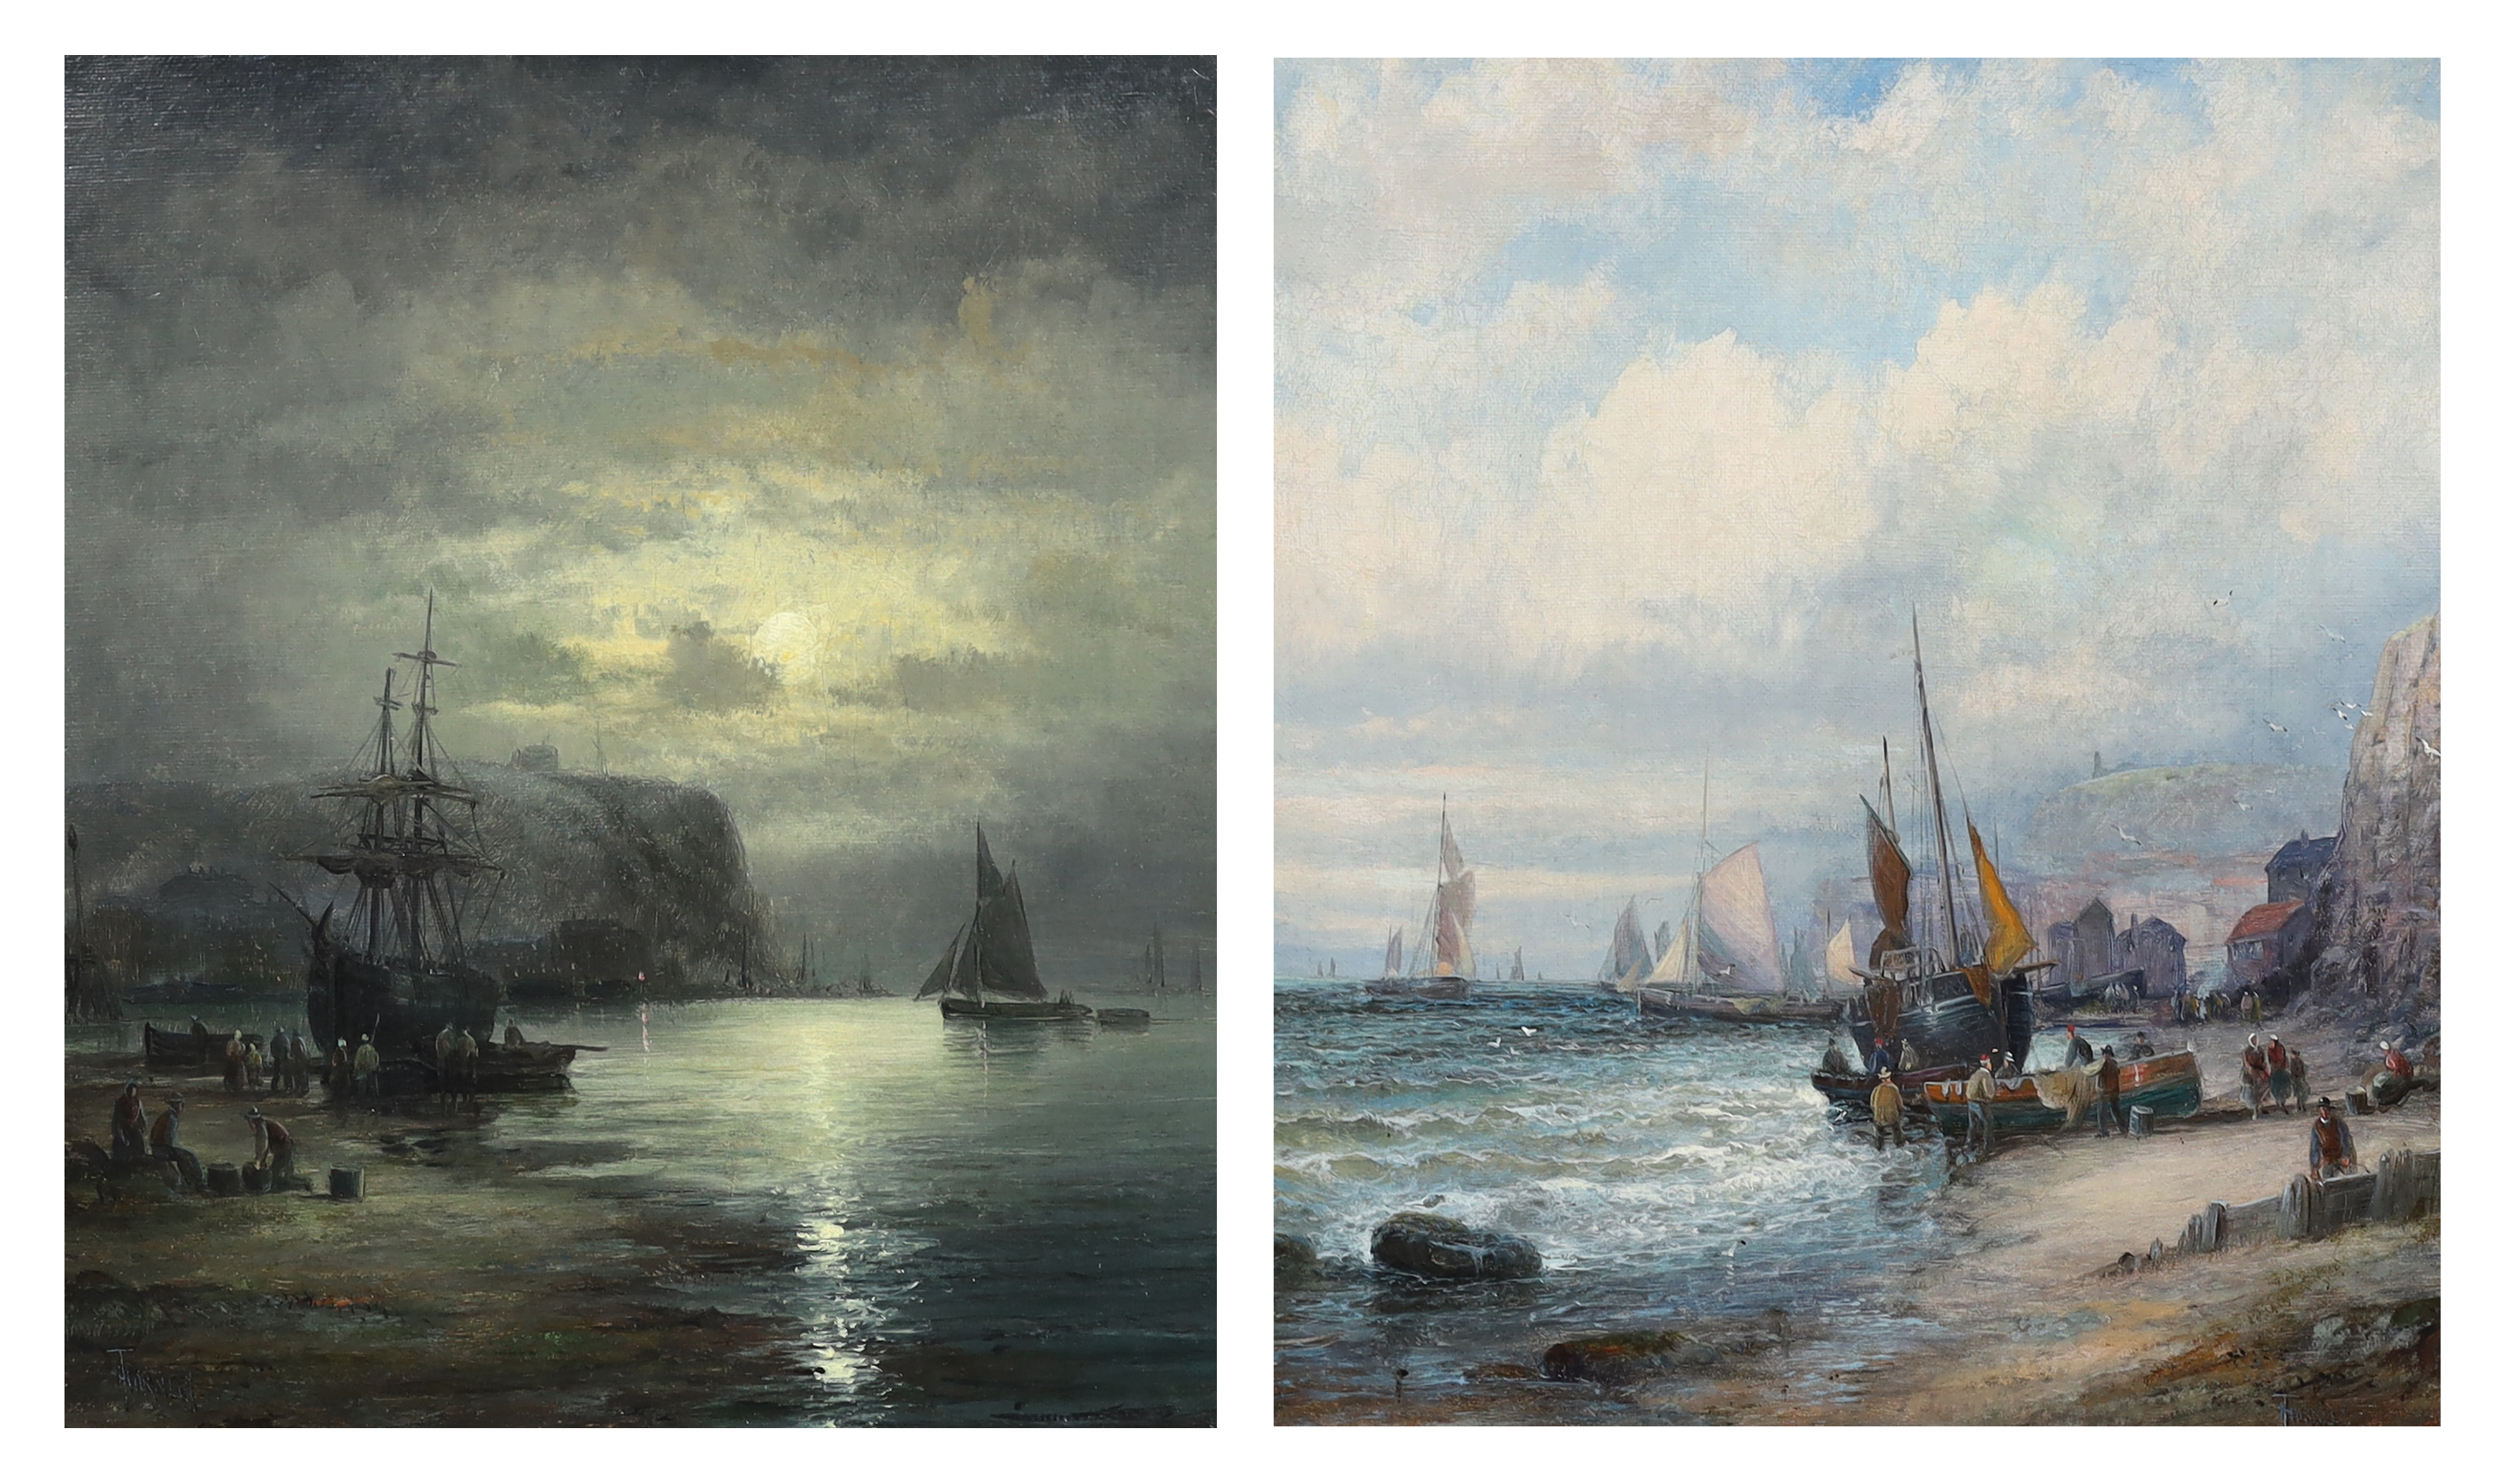 Hubert Thornley (William Anslow Thornley) (fl.1859-1898), Fisherfolk along the coast at Whitby by day and night, oils on canvas, a pair, 35 x 30cm